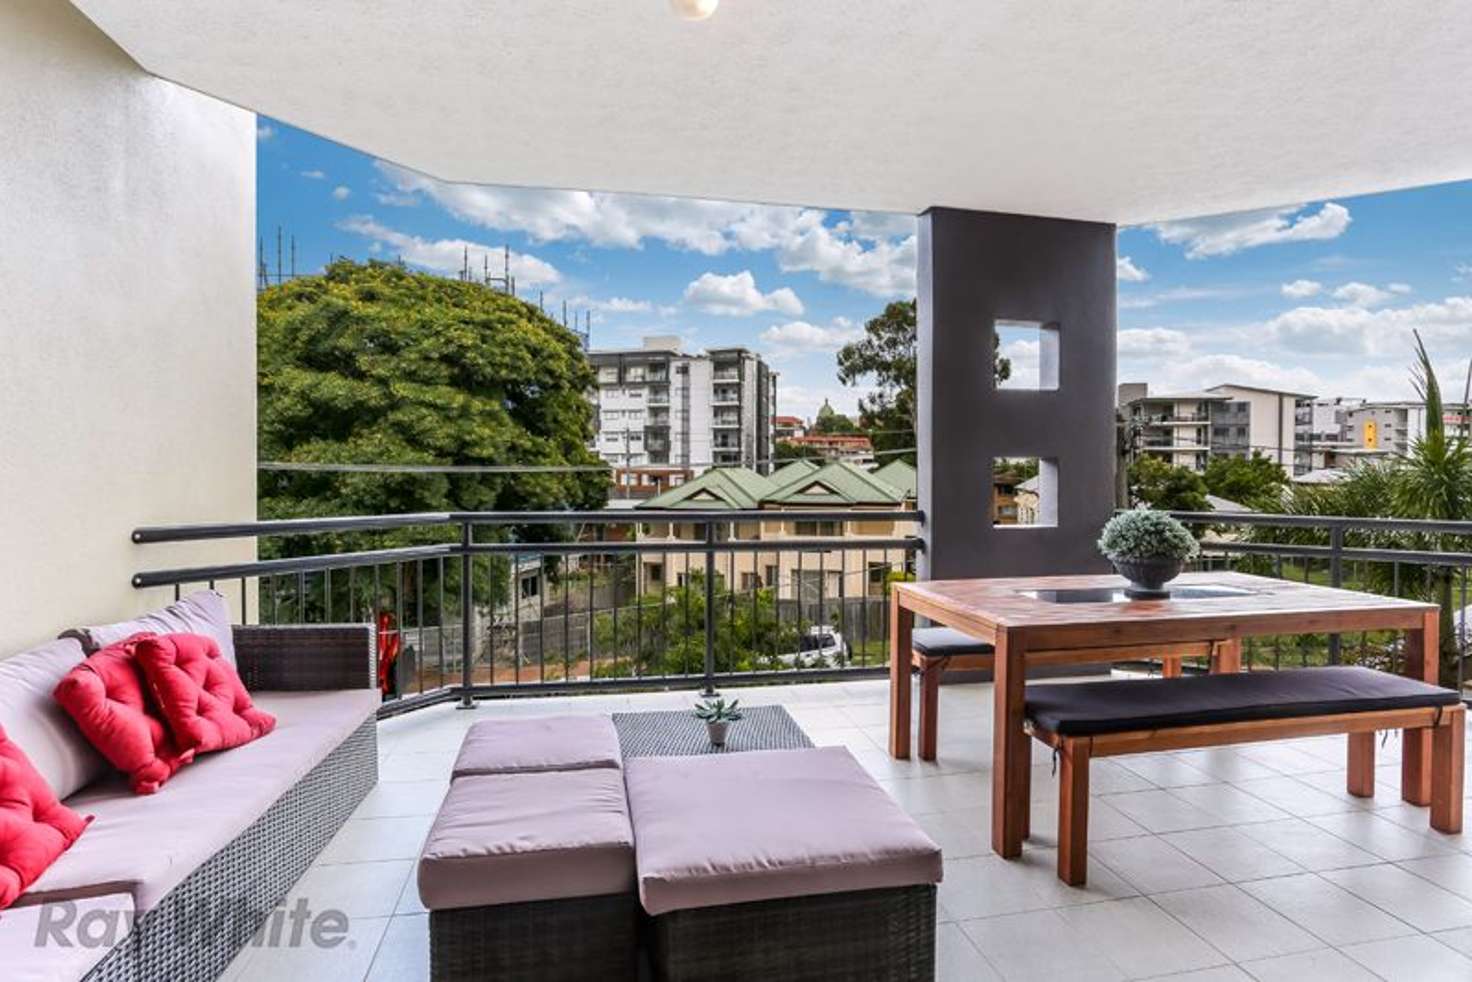 Main view of Homely apartment listing, 4/9 Amisfield Avenue, Nundah QLD 4012